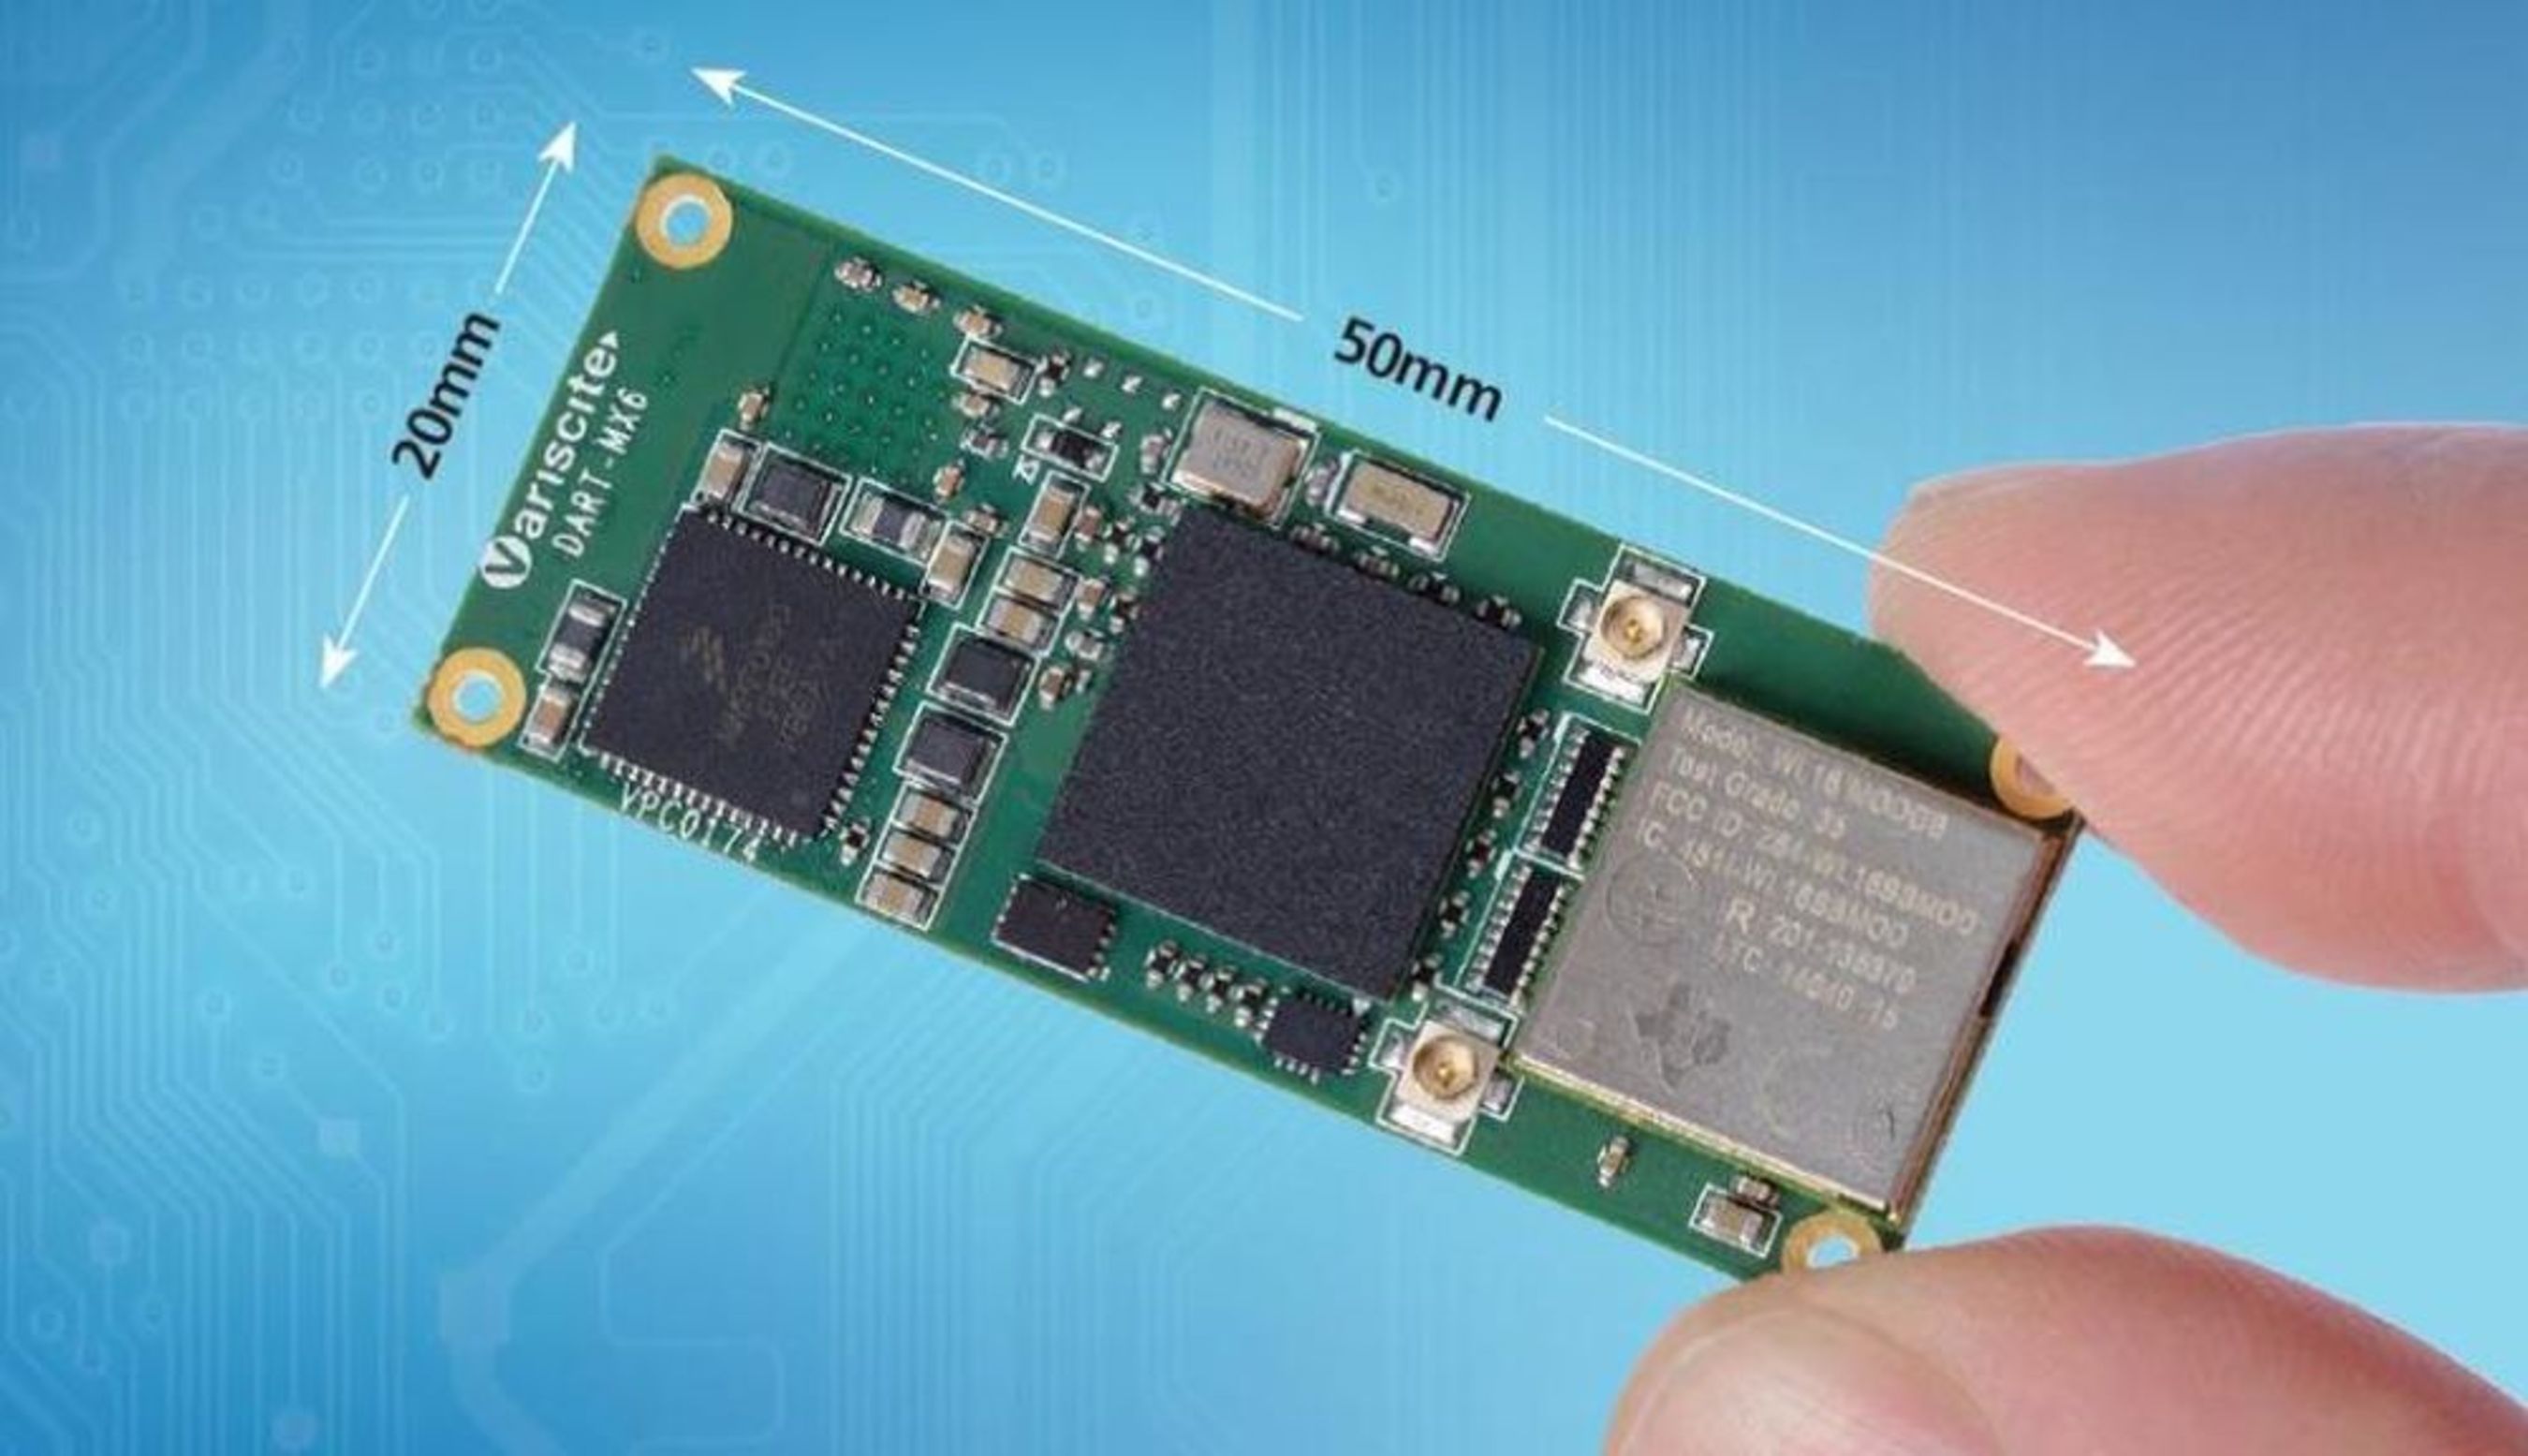 Measuring only 20x50x4mm, Variscite's DART-MX6 is the smallest Freescale i.MX6 System-on-Module in the market. (PRNewsFoto/Variscite)